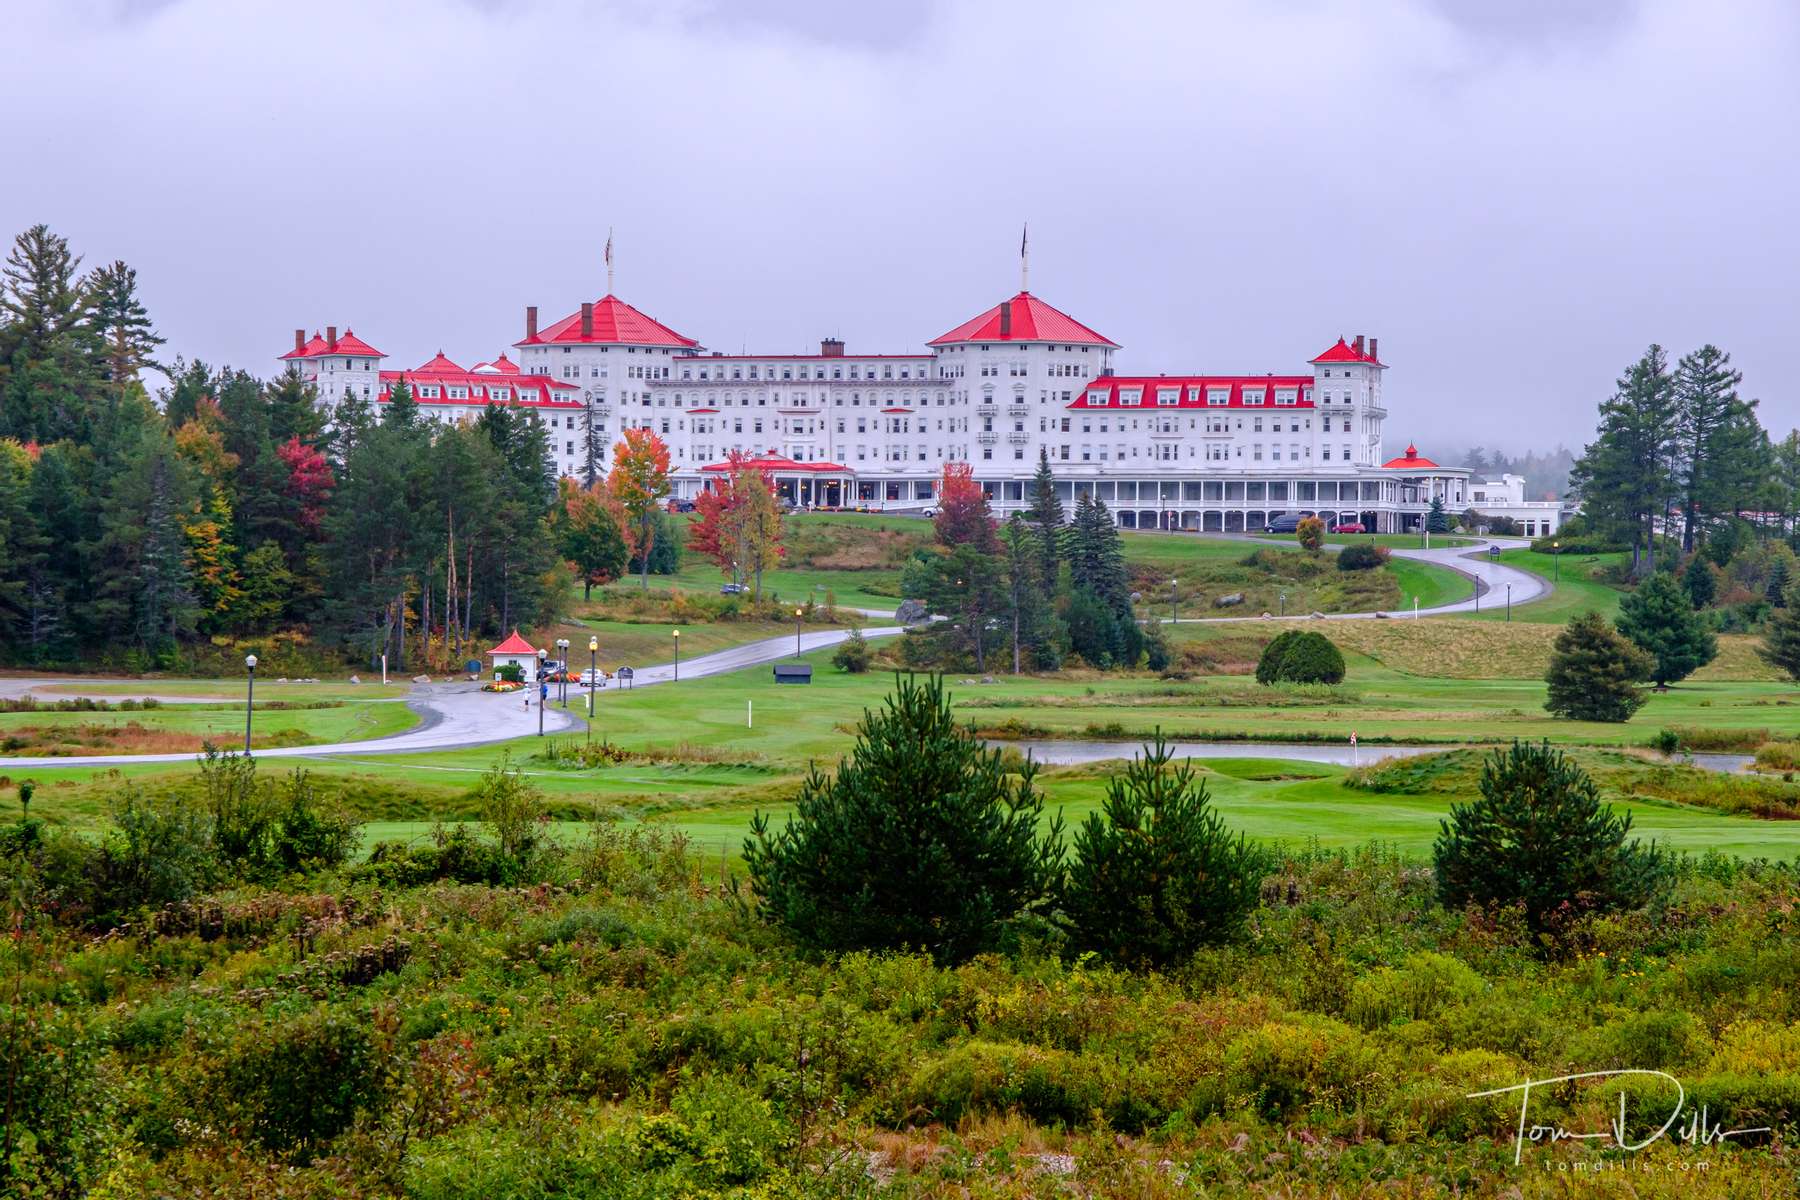 The Omni Mount Washington Resort in Bretton Woods, New Hampshire (no, we didn't stay there).